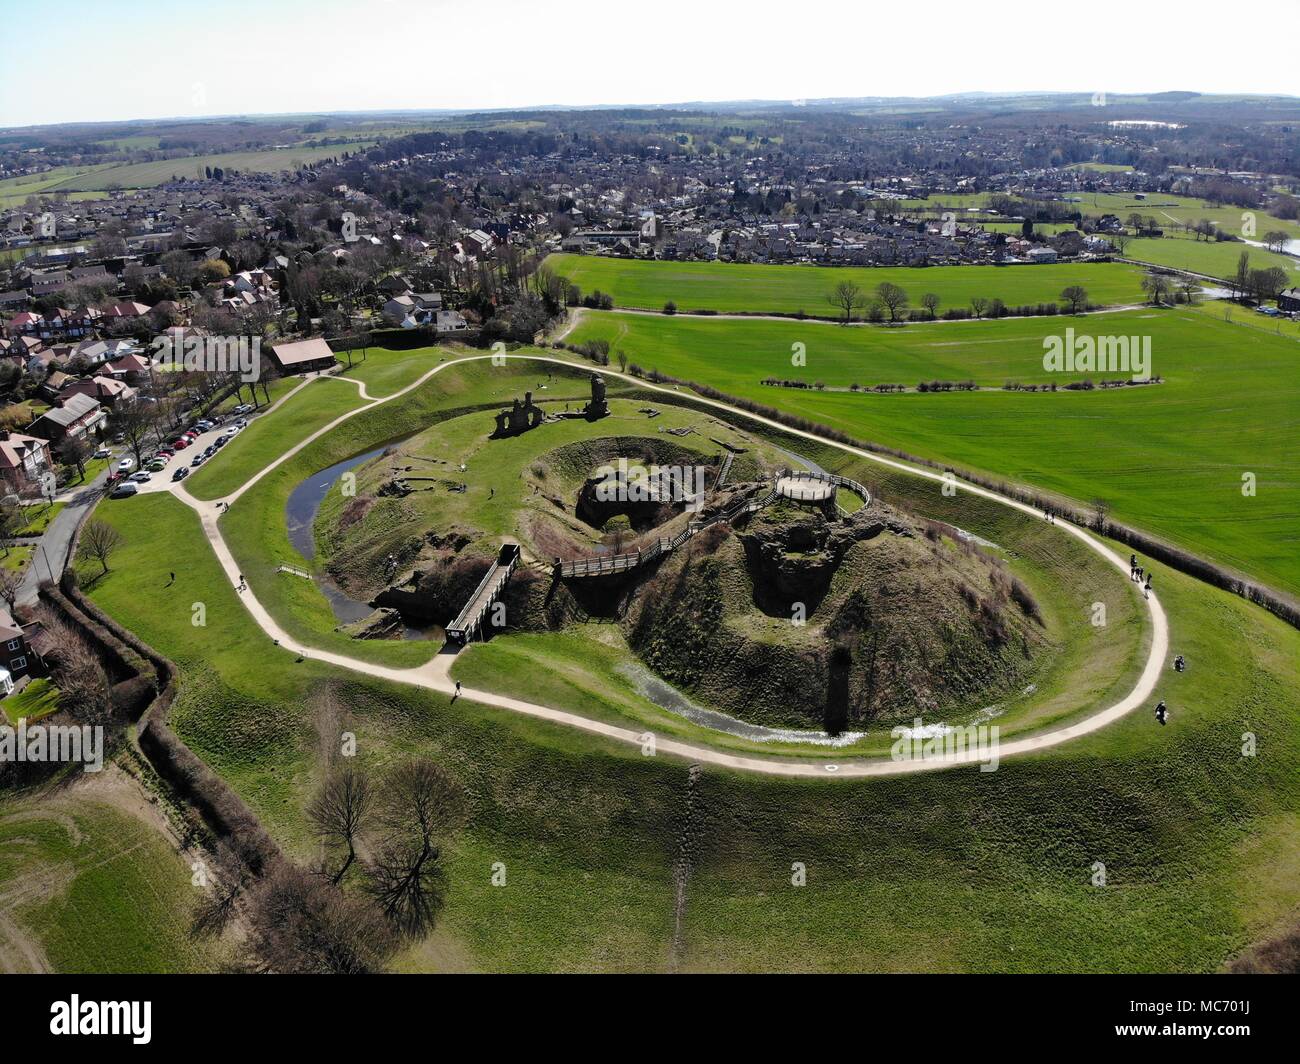 Aerial photos of Sandel Castle in Wakefield in the UK, the ruins of the castle have a moat around the castle grounds, it's also covered in green grass Stock Photo